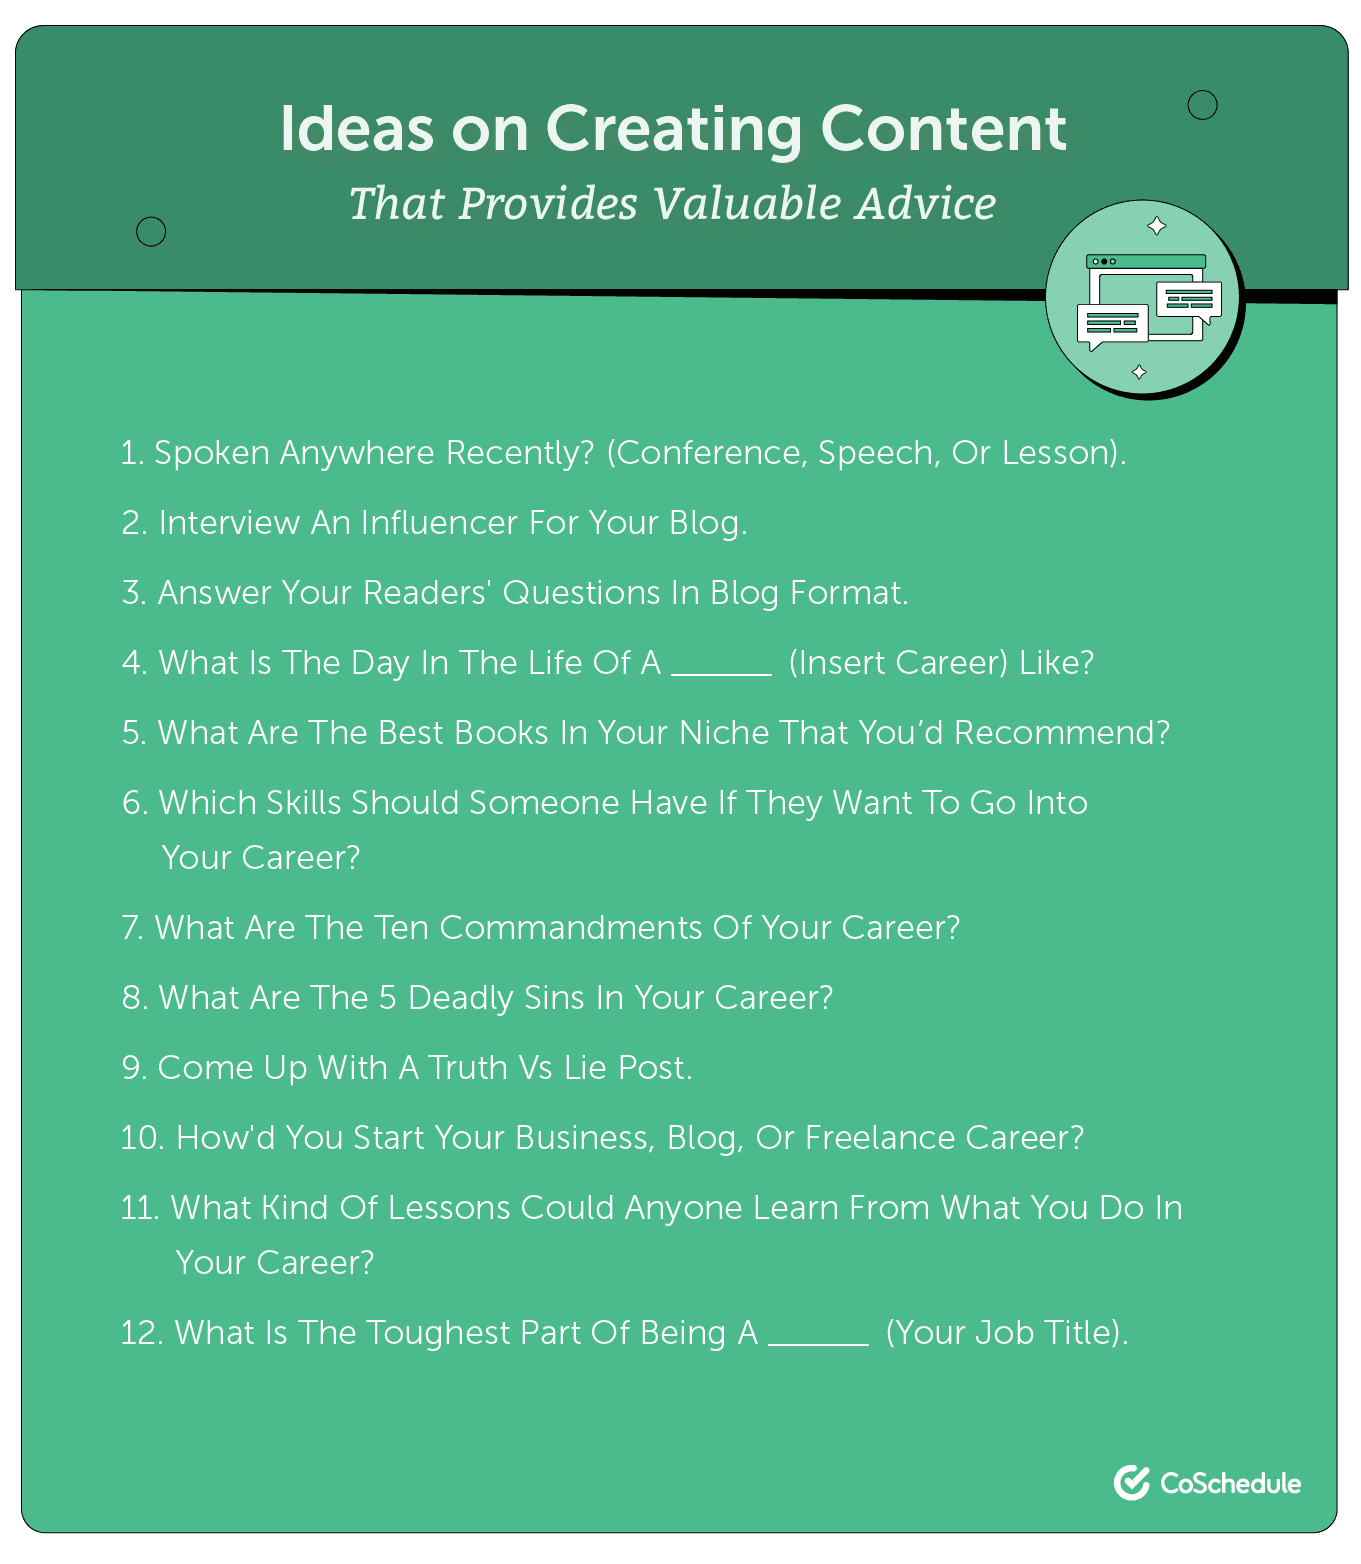 Ideas for creating content.